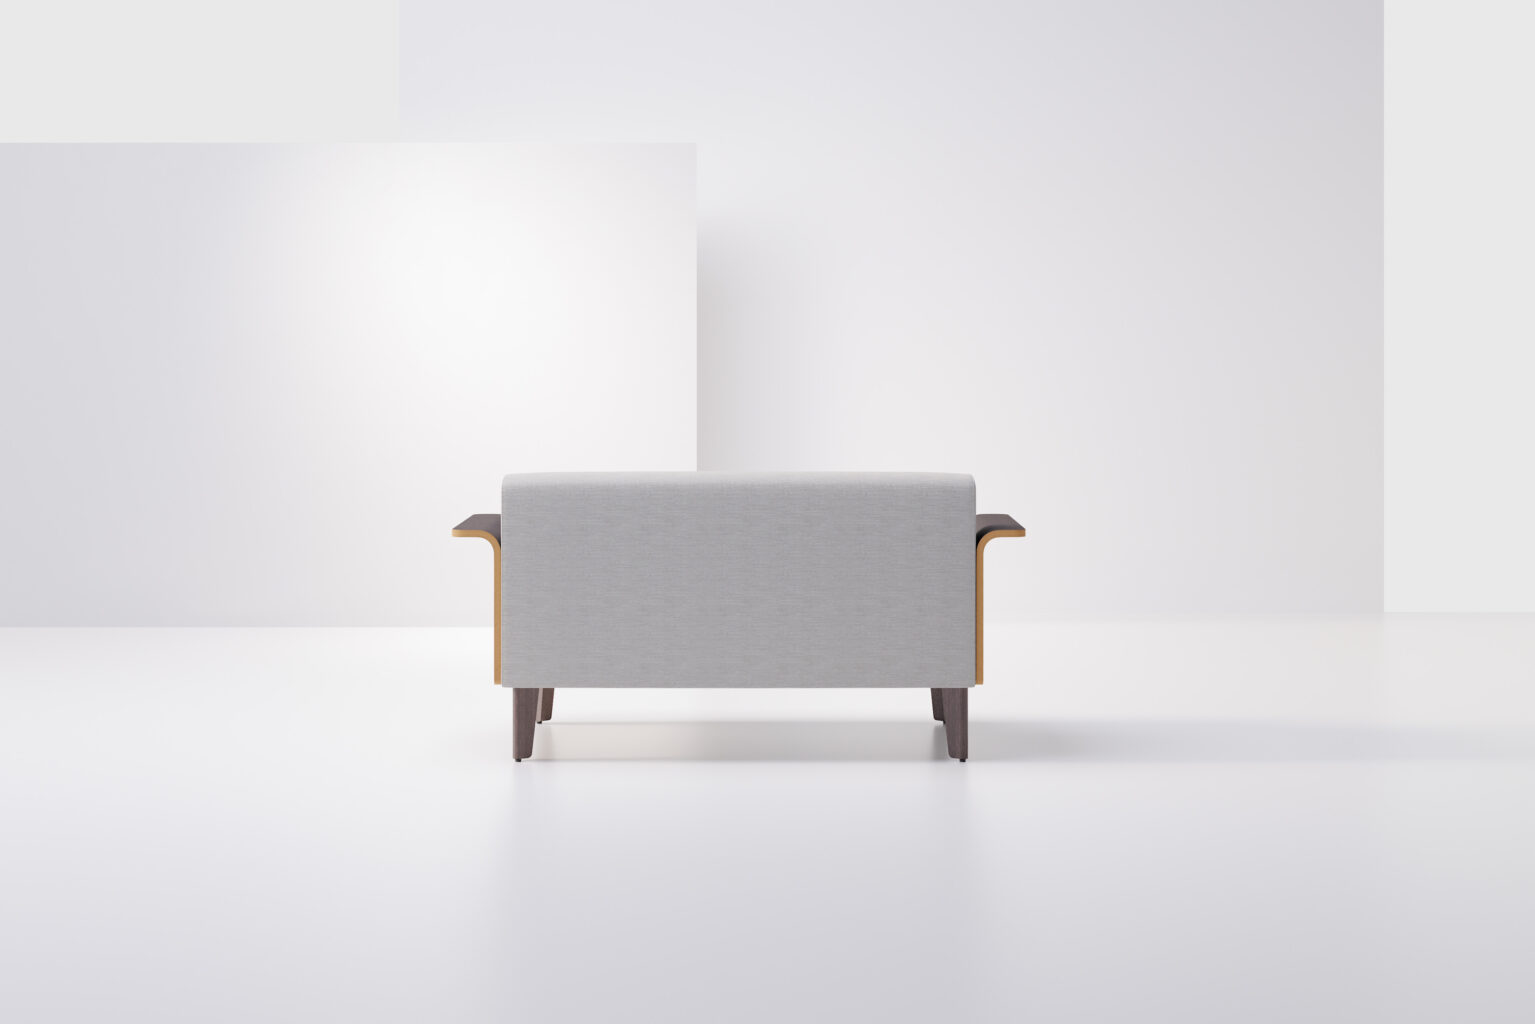 Avila Sofa with Molded Wood Arms Product Image 4